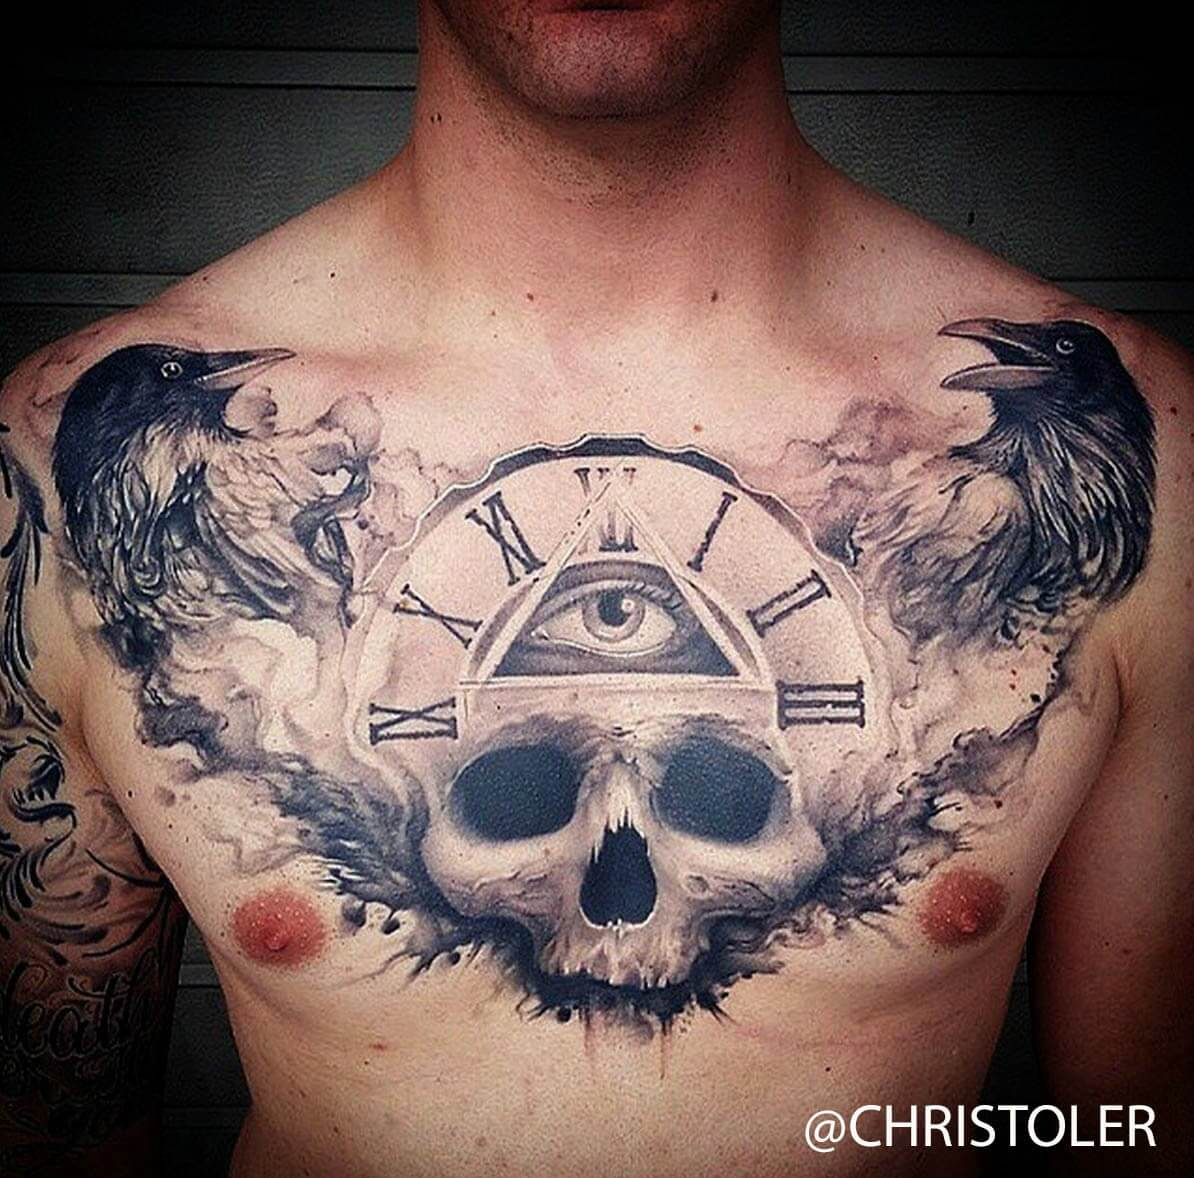 The 100 Best Chest Tattoos For Men Improb pertaining to sizing 1194 X 1178